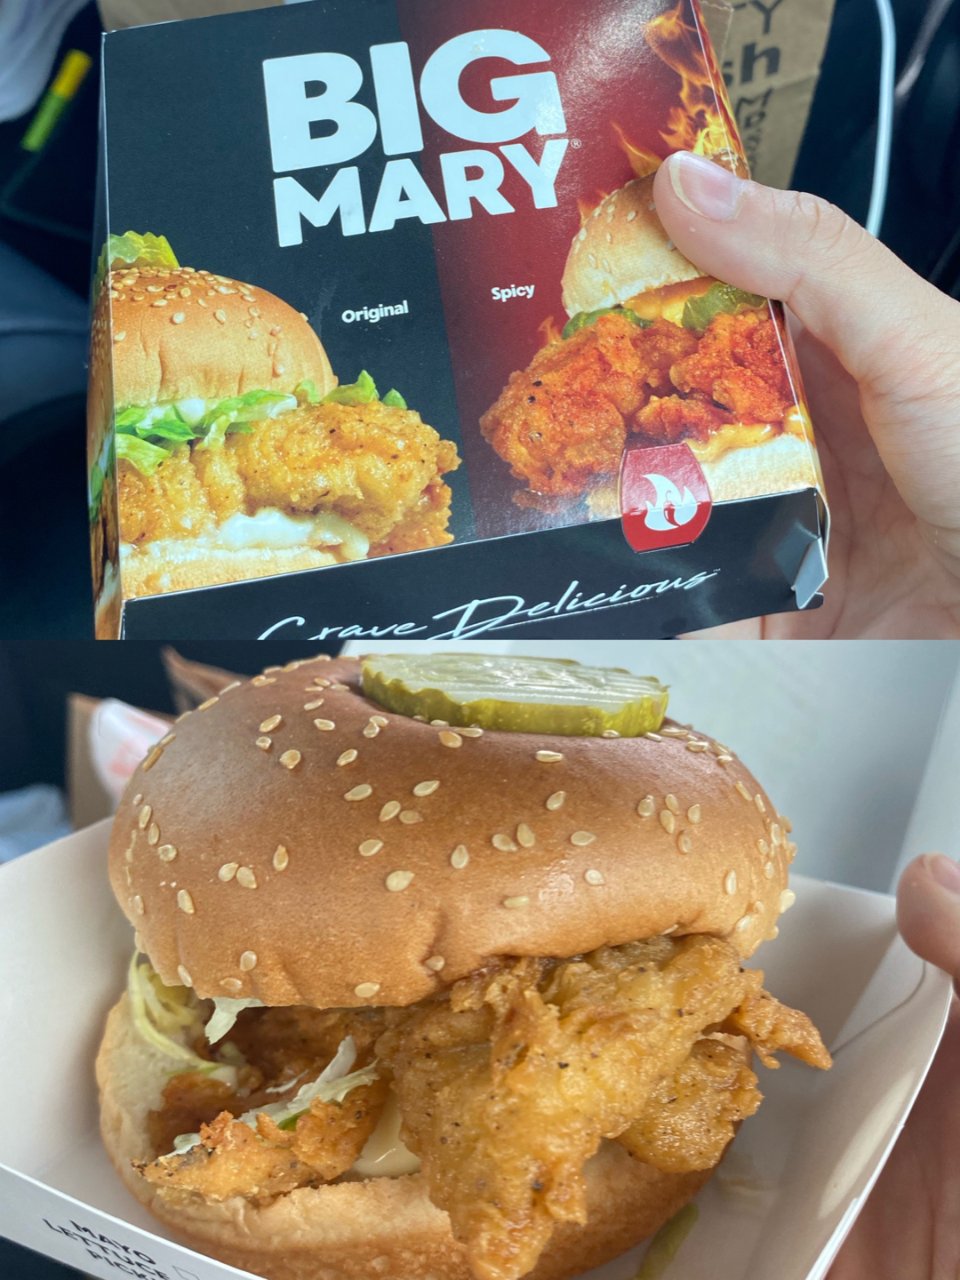 Mary Brown's 免费汉堡🍔薅羊...